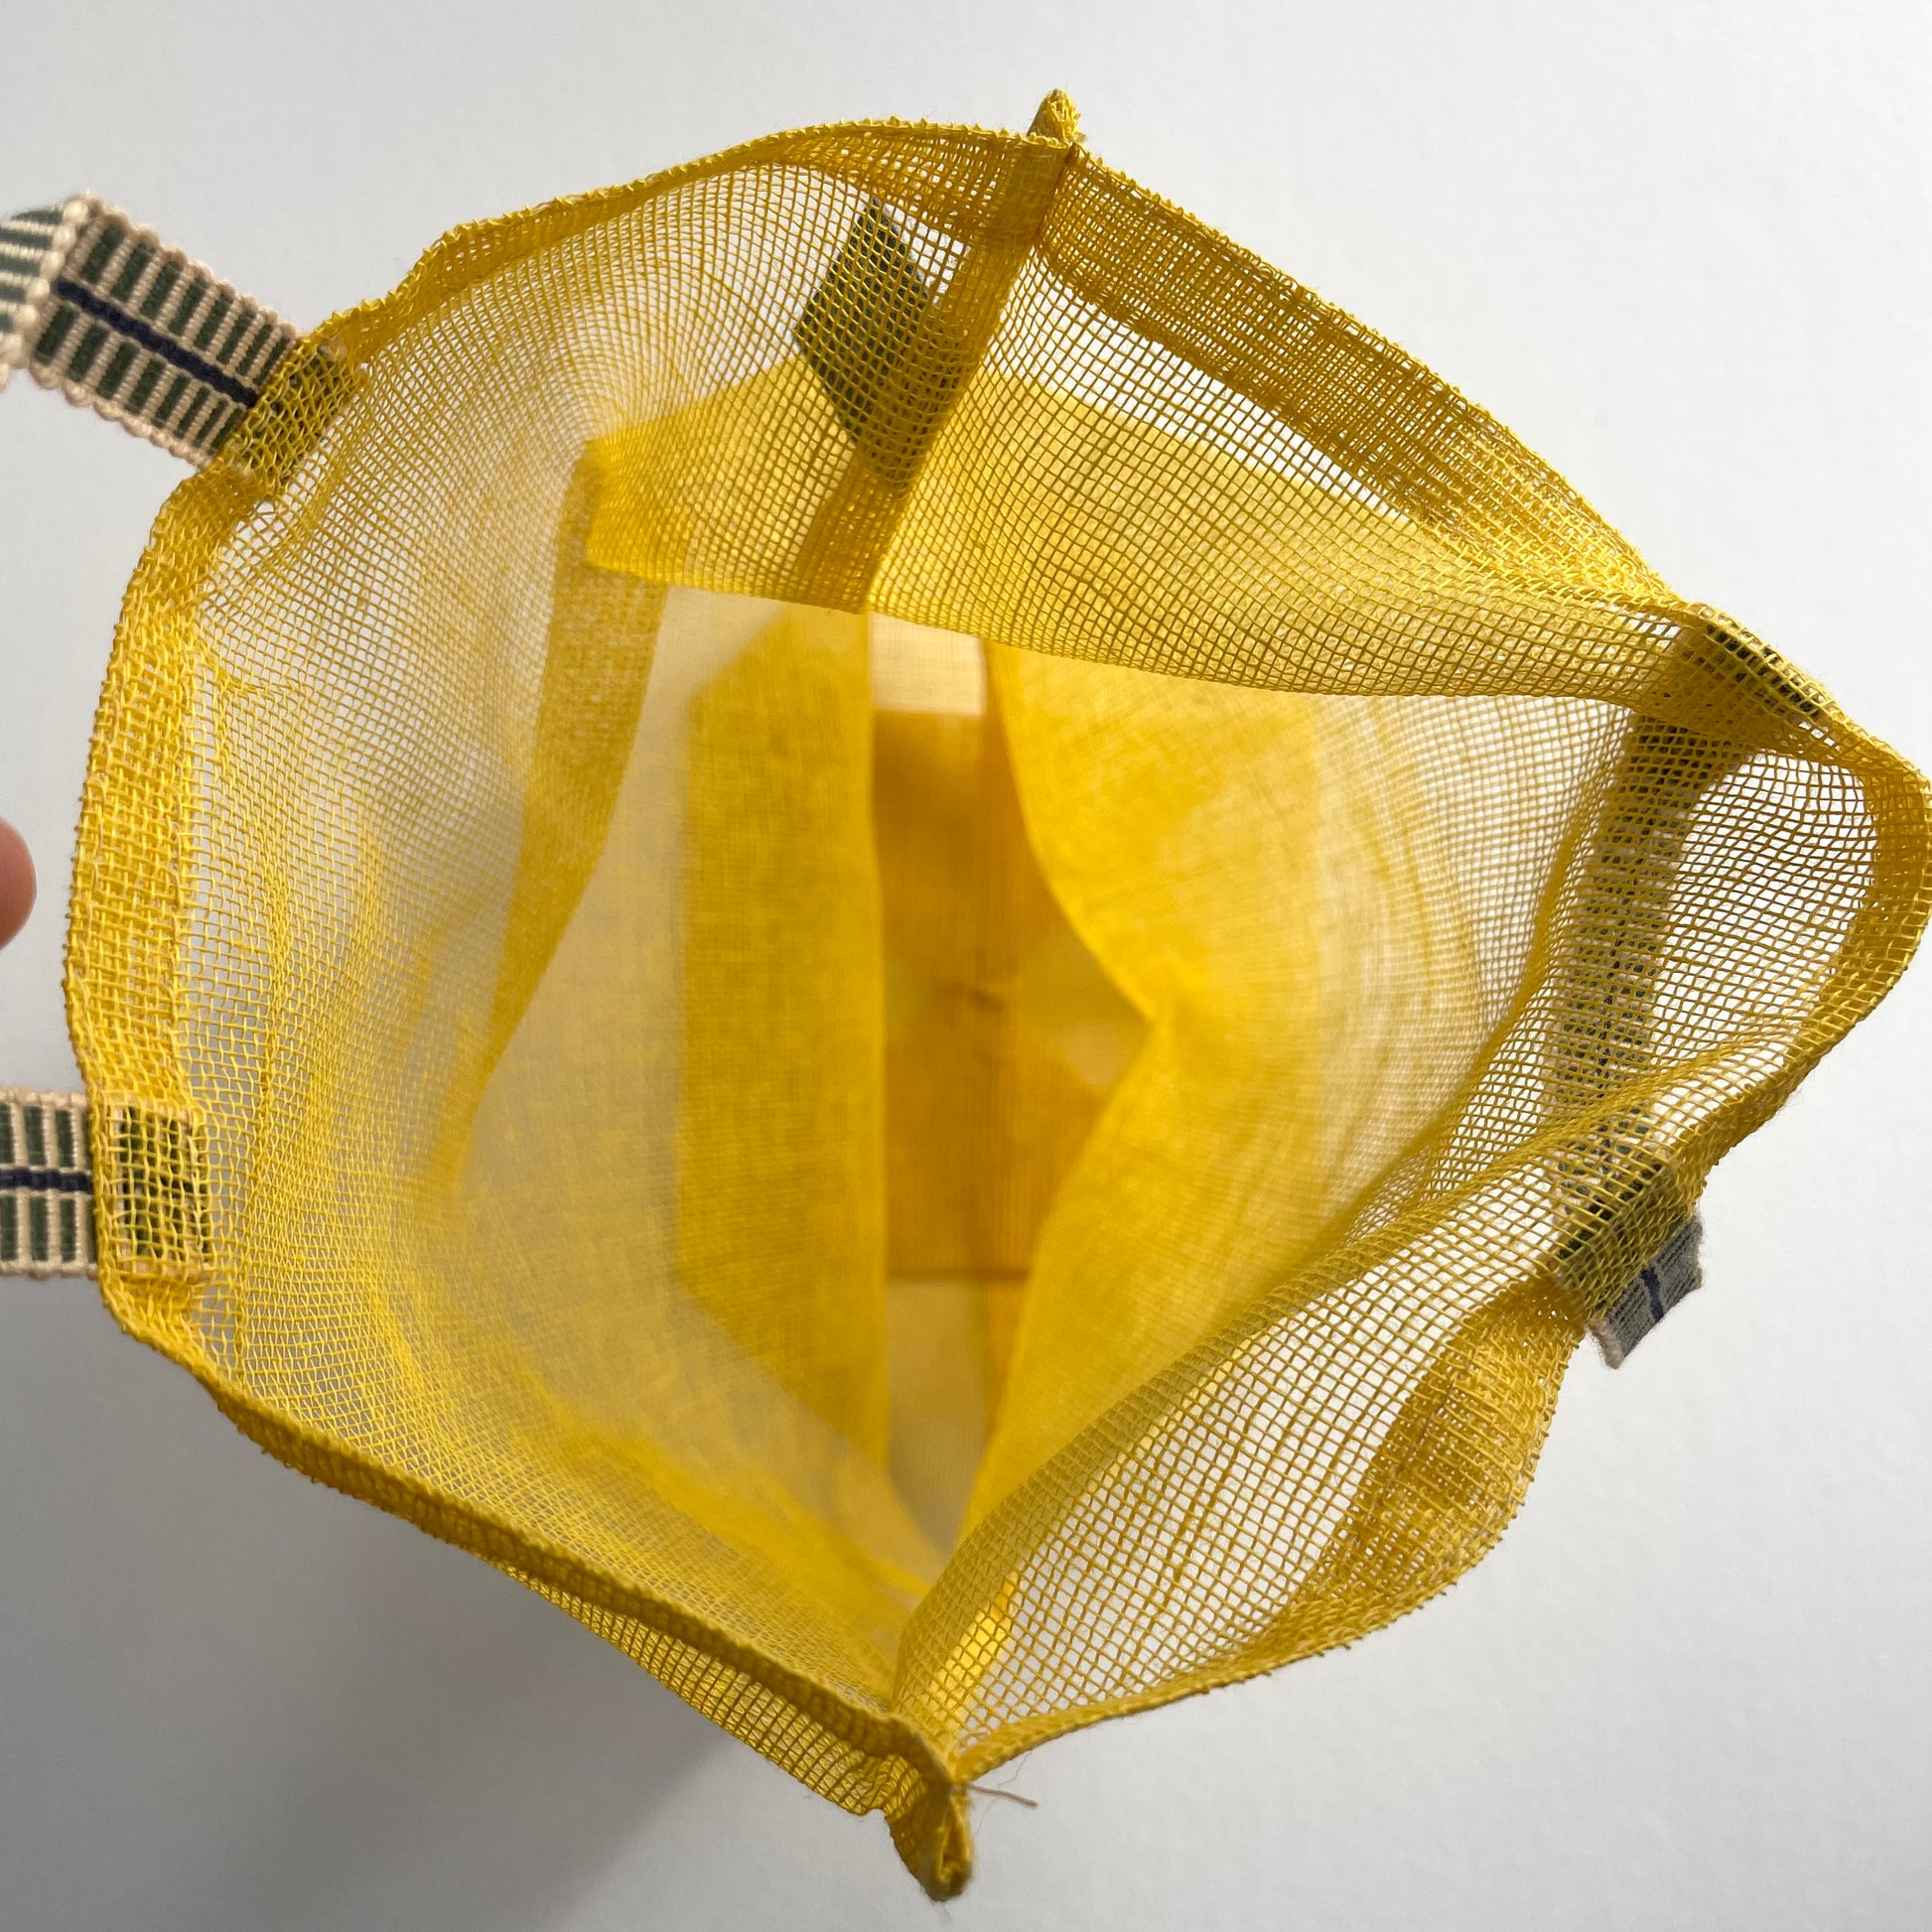 100 percent cotton mesh mosquito net eco produce bags with handle in yellow